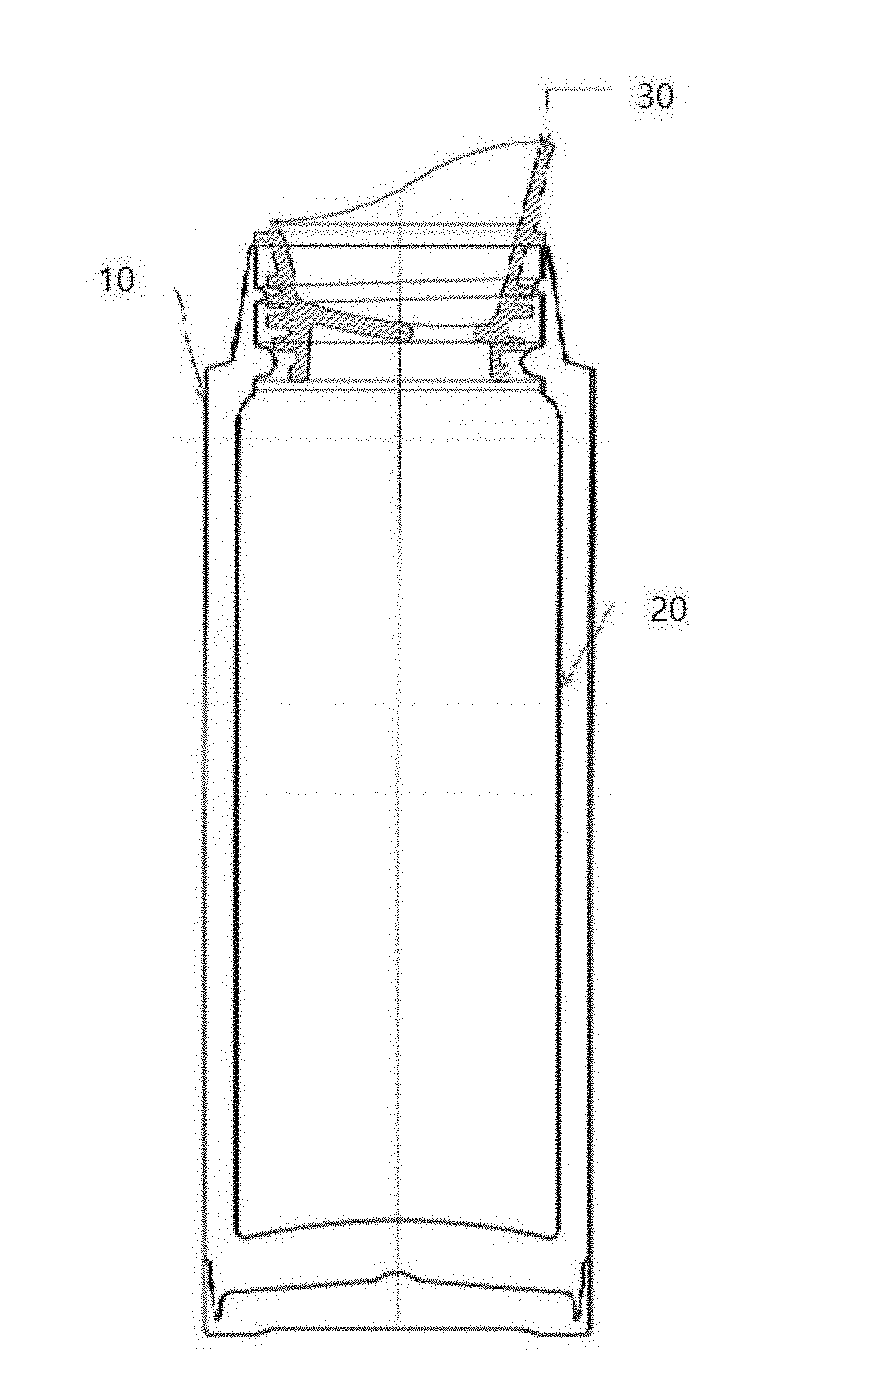 Antibacterial product and method of manufacturing the same